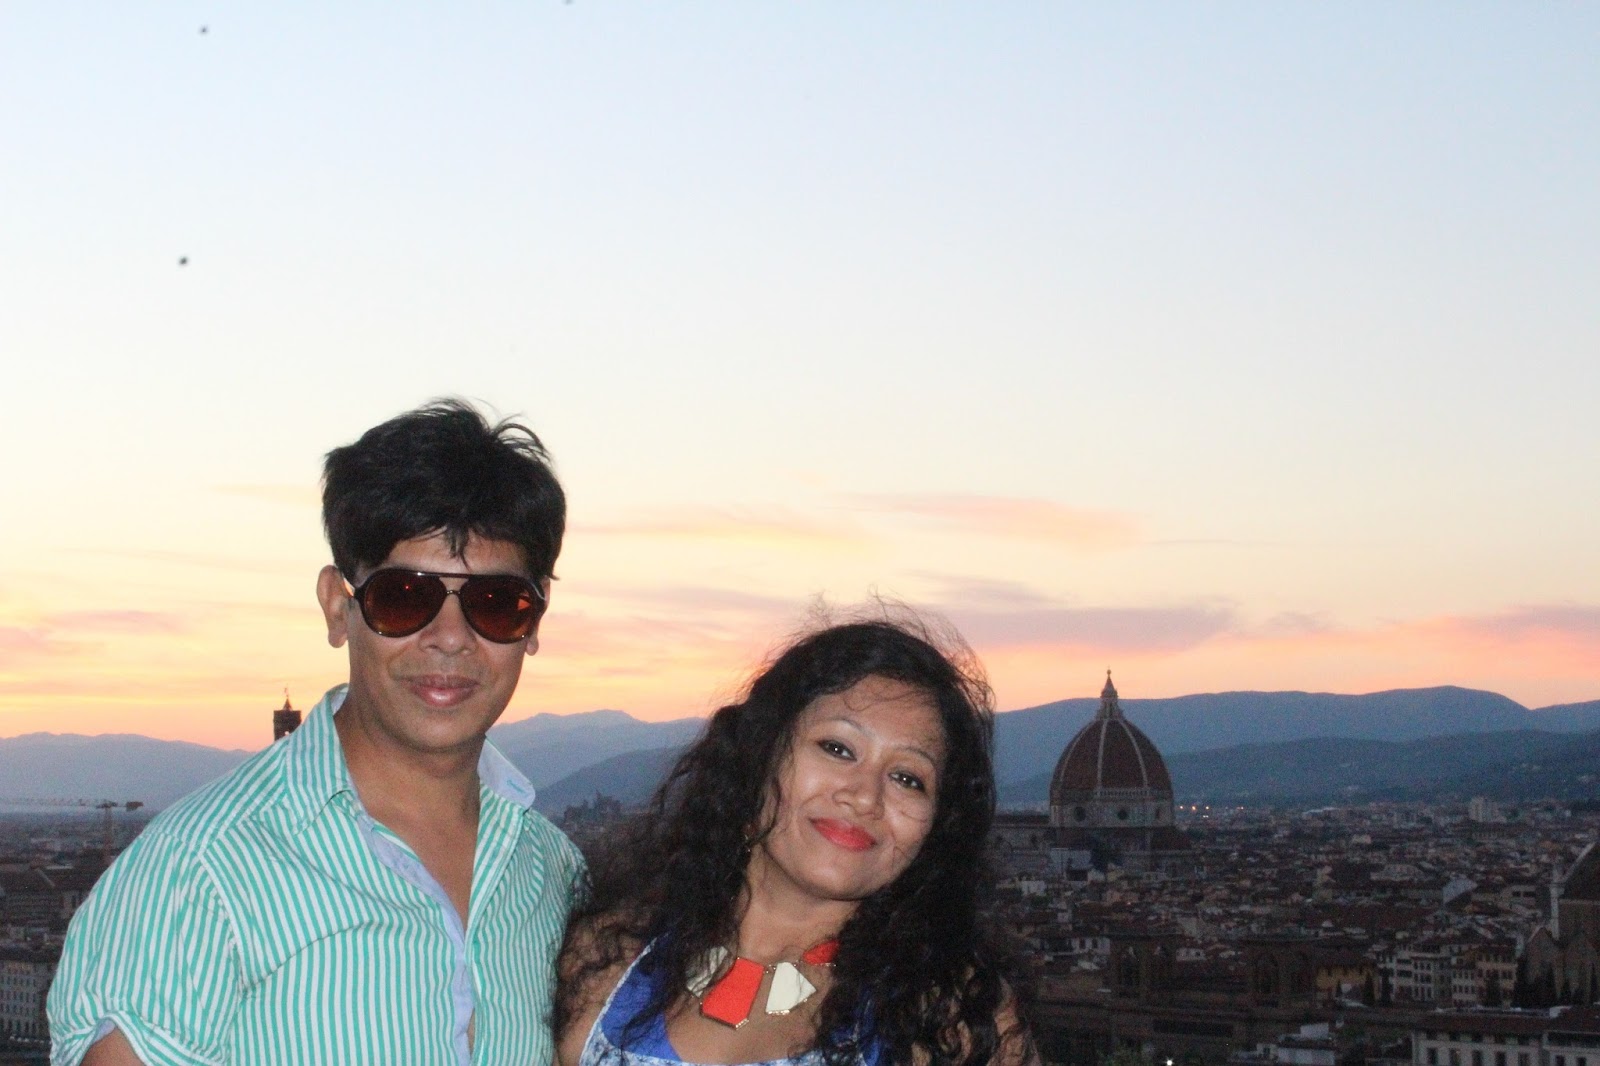 Florence Sunset View, Sunset Piazzale Michelangelo, Florence sunset Michelangelo, Best place to watch sunset in Florence